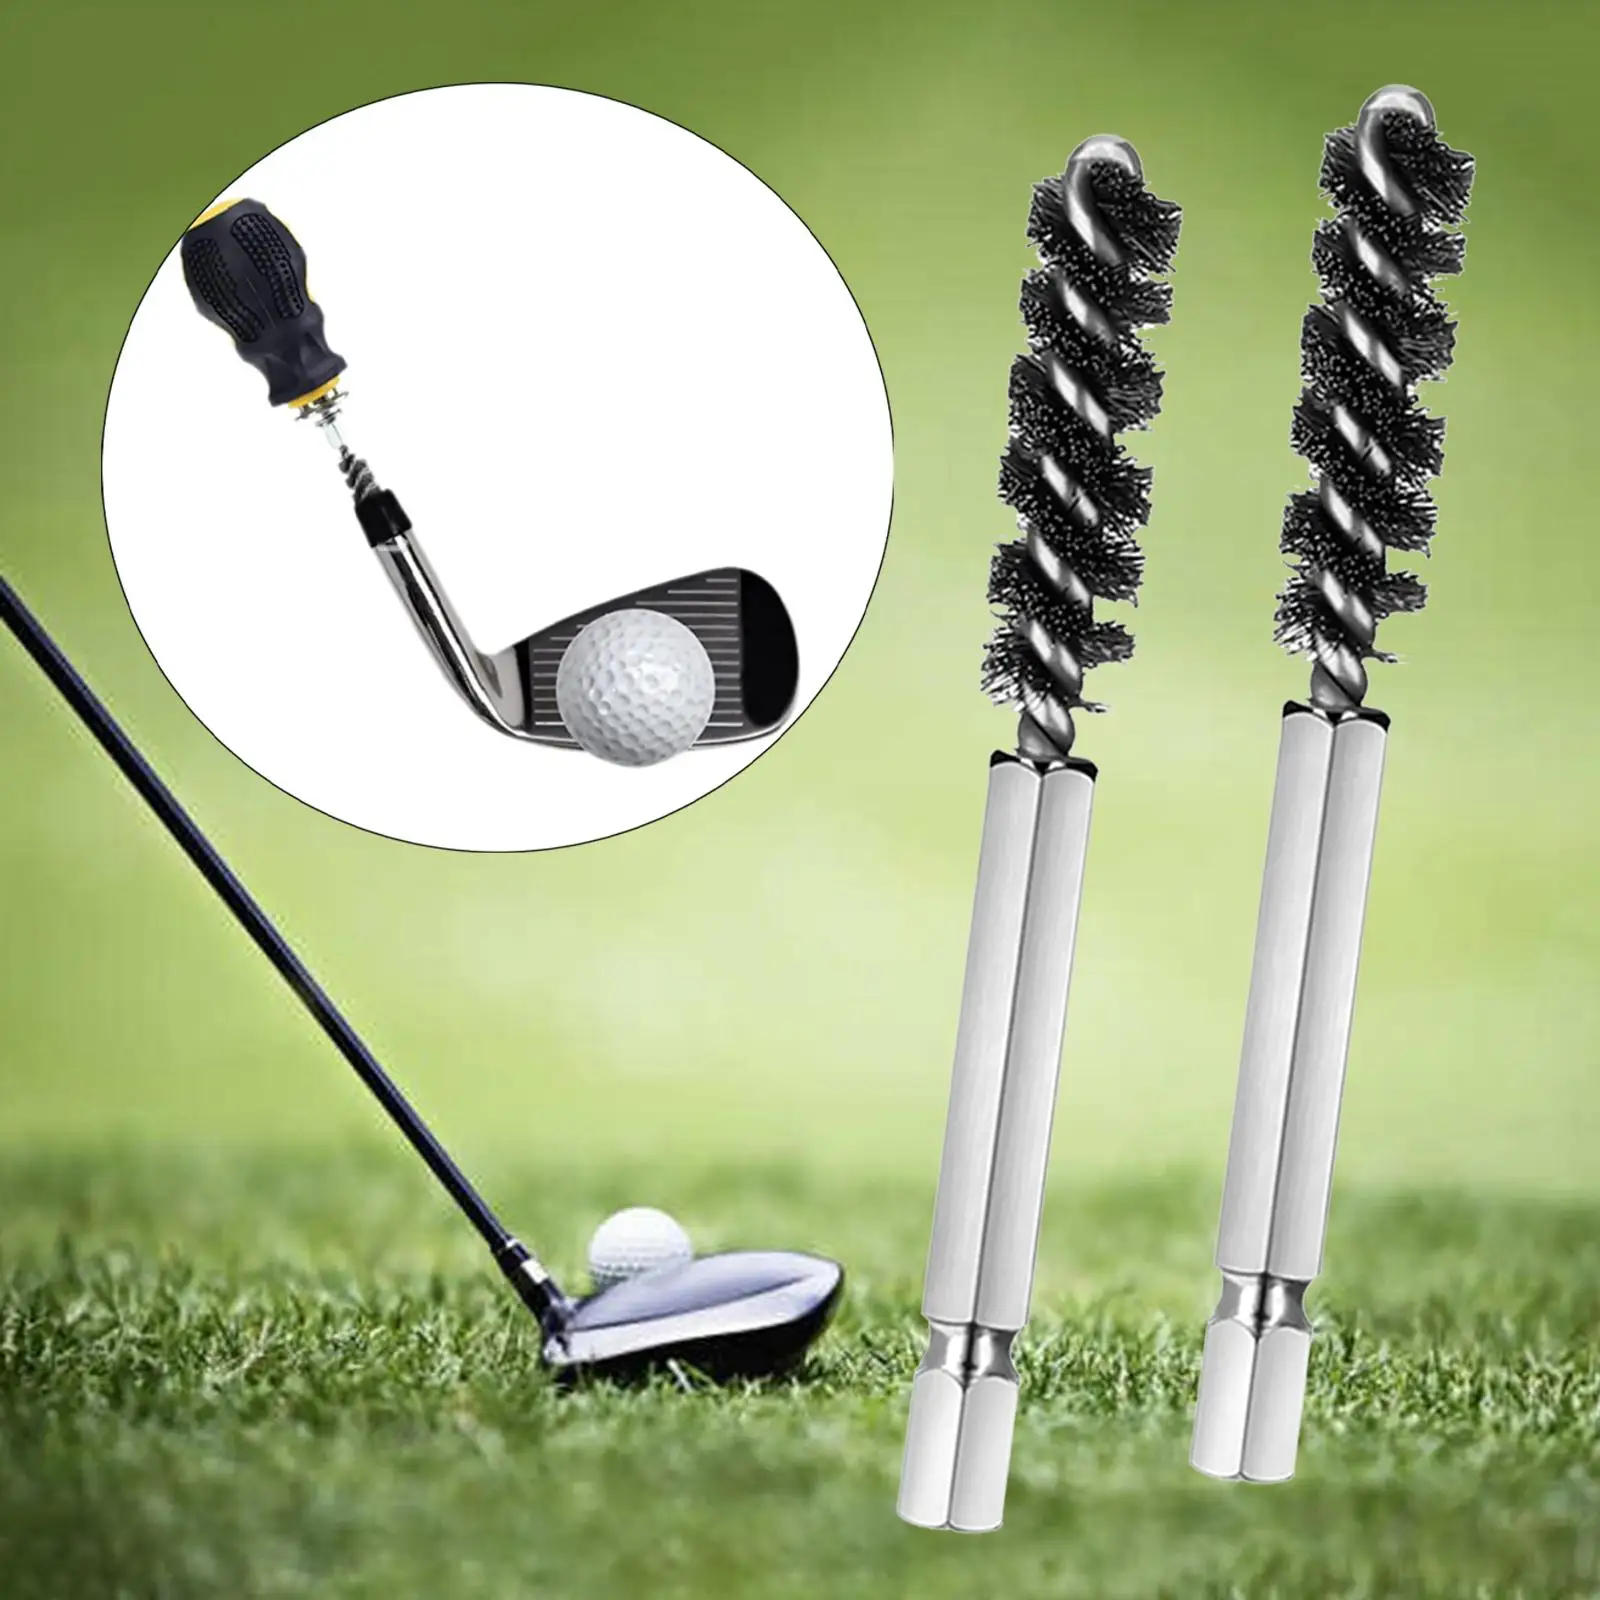 2x Accs Durable Multipurpose Electric Drill Cleaning Tool Bore Brush Argent Golf Club Head Hosel Brush for Polishing Golf Lovers